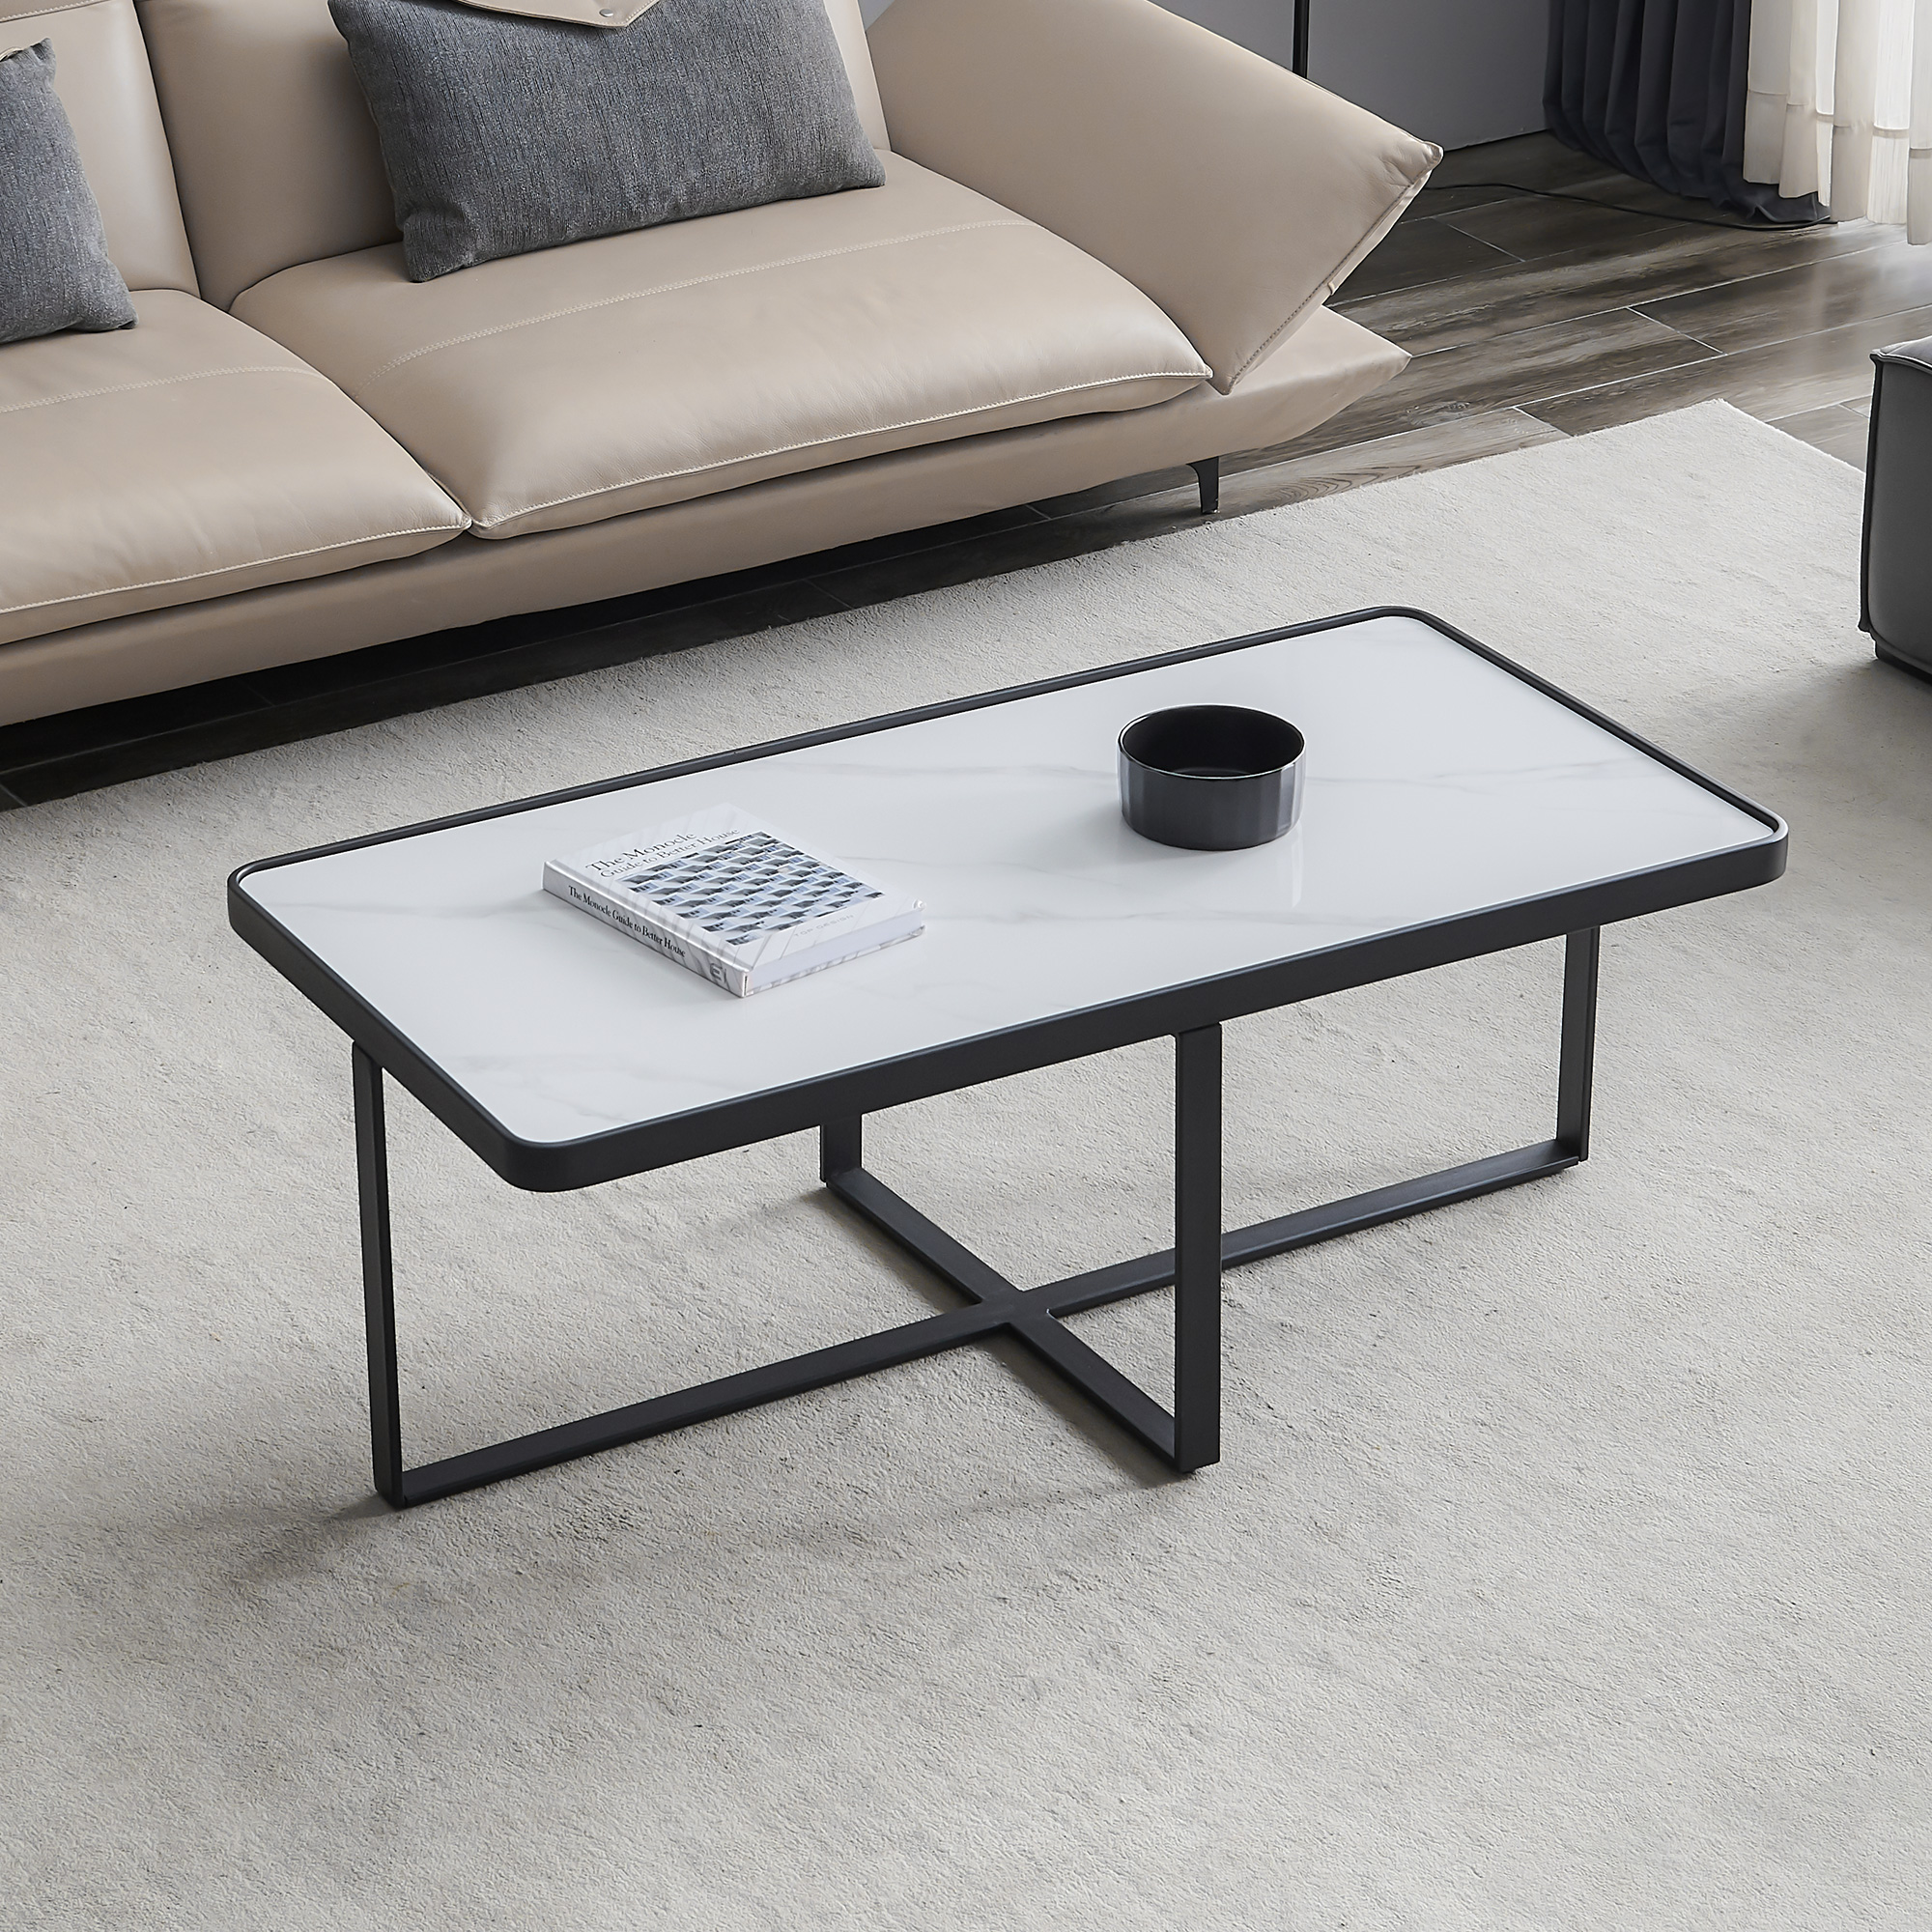 Minimalism rectangle coffee table,Black metal frame with sintered stone tabletop-Boyel Living